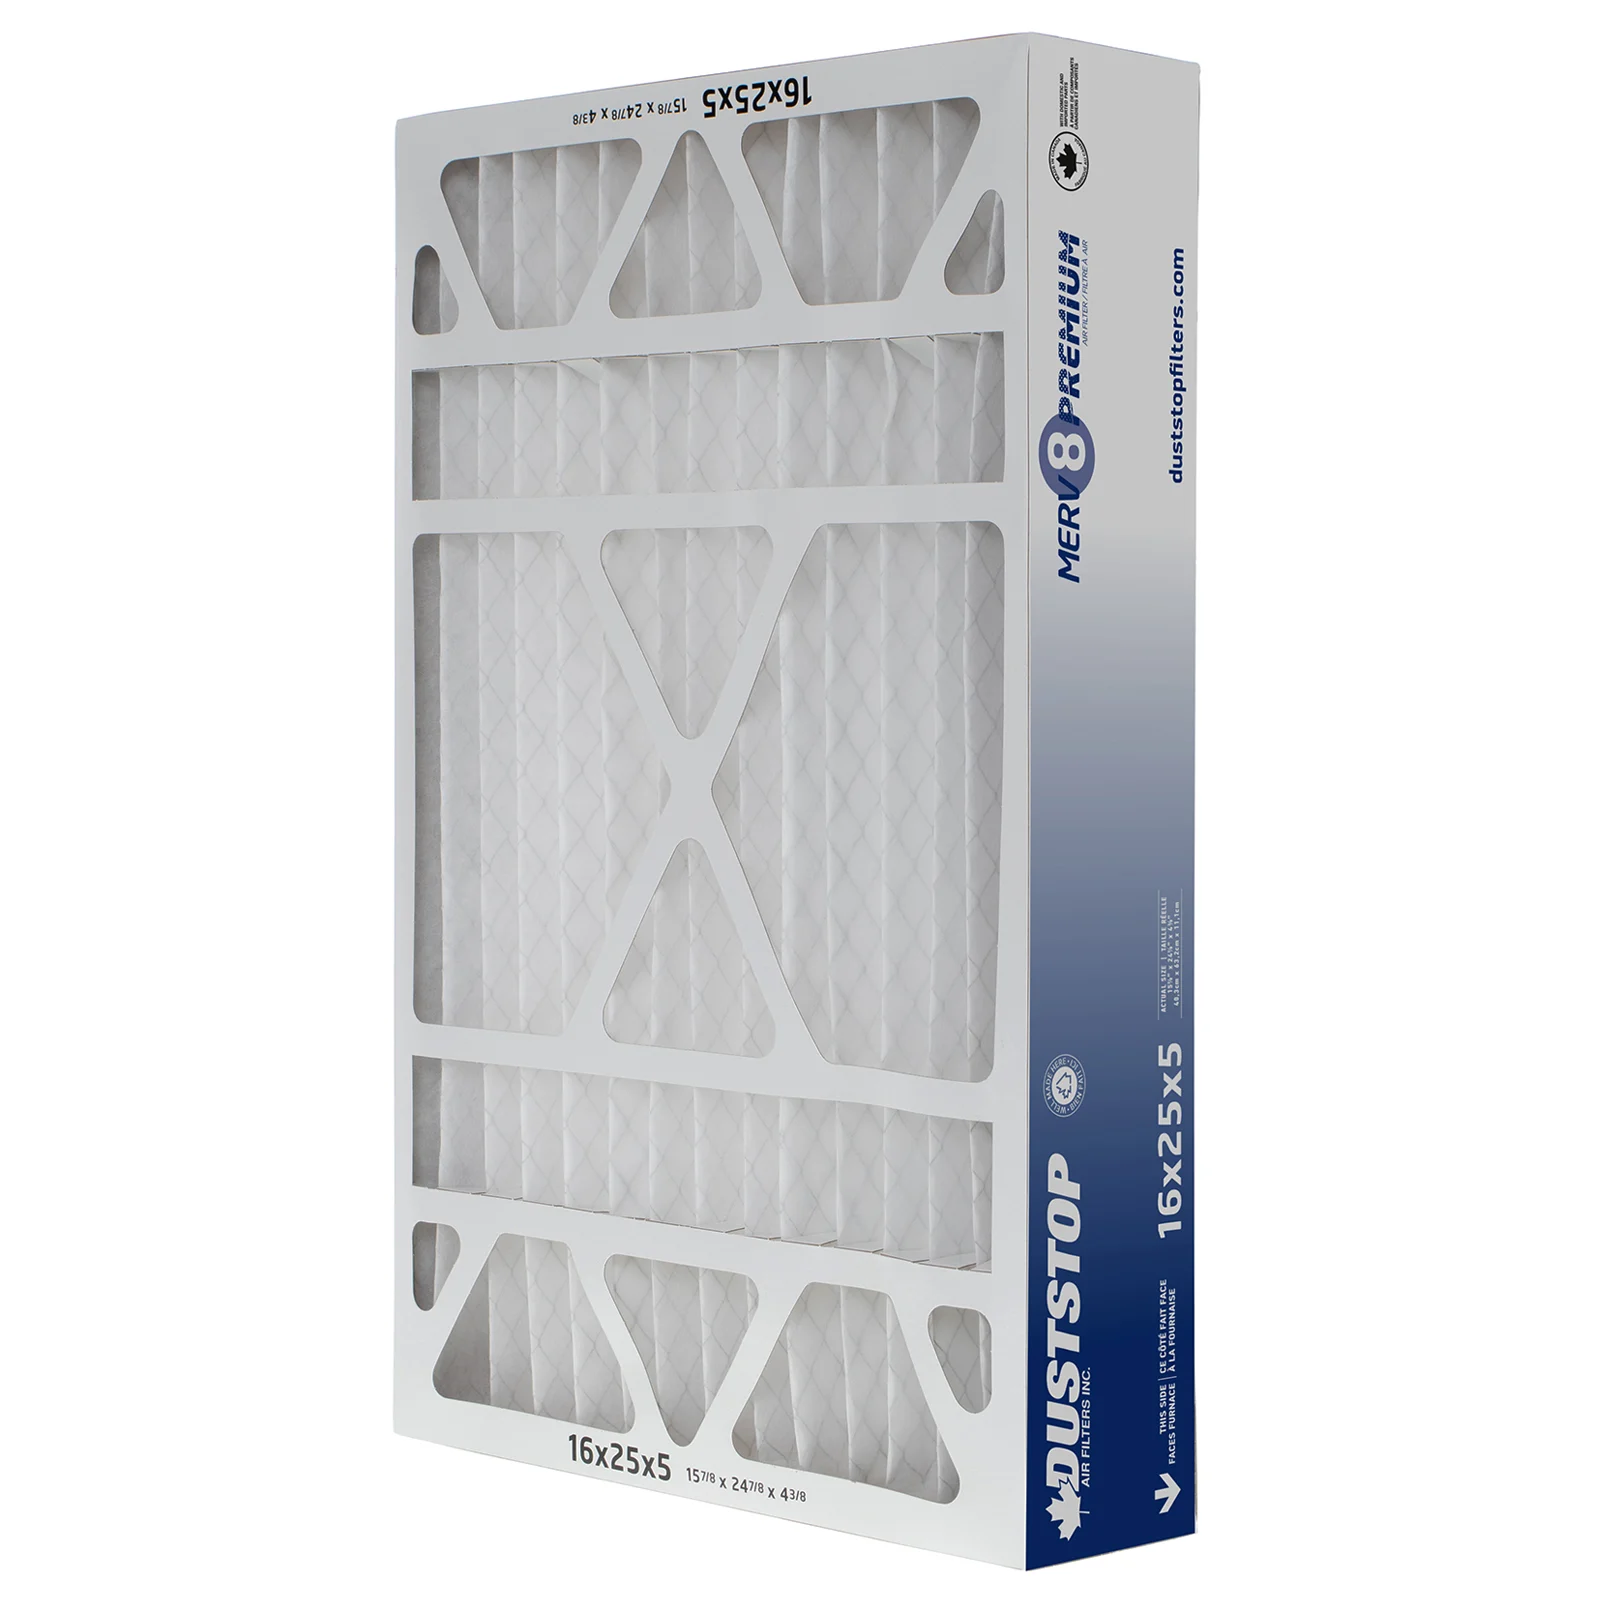 A pleated furnace filter